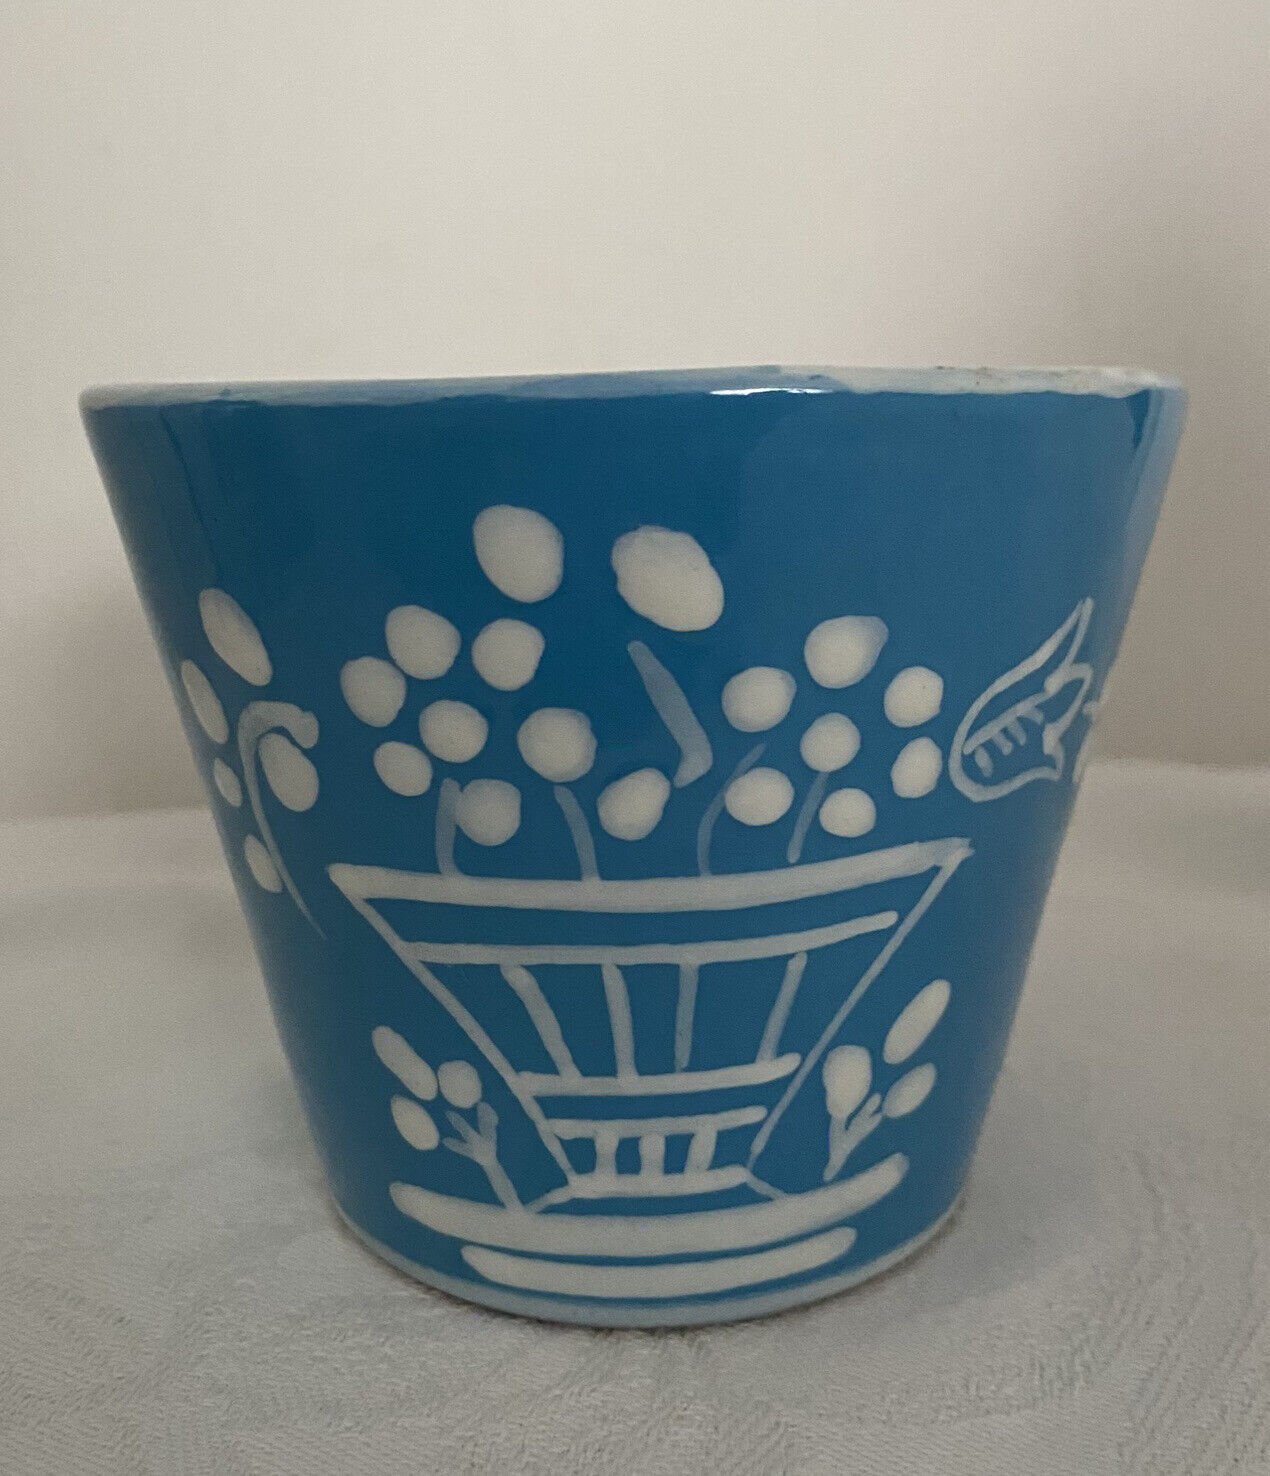 Art Pottery Ceramic Planter Cachepot Italy Signed Numbered Hand Painted Blue